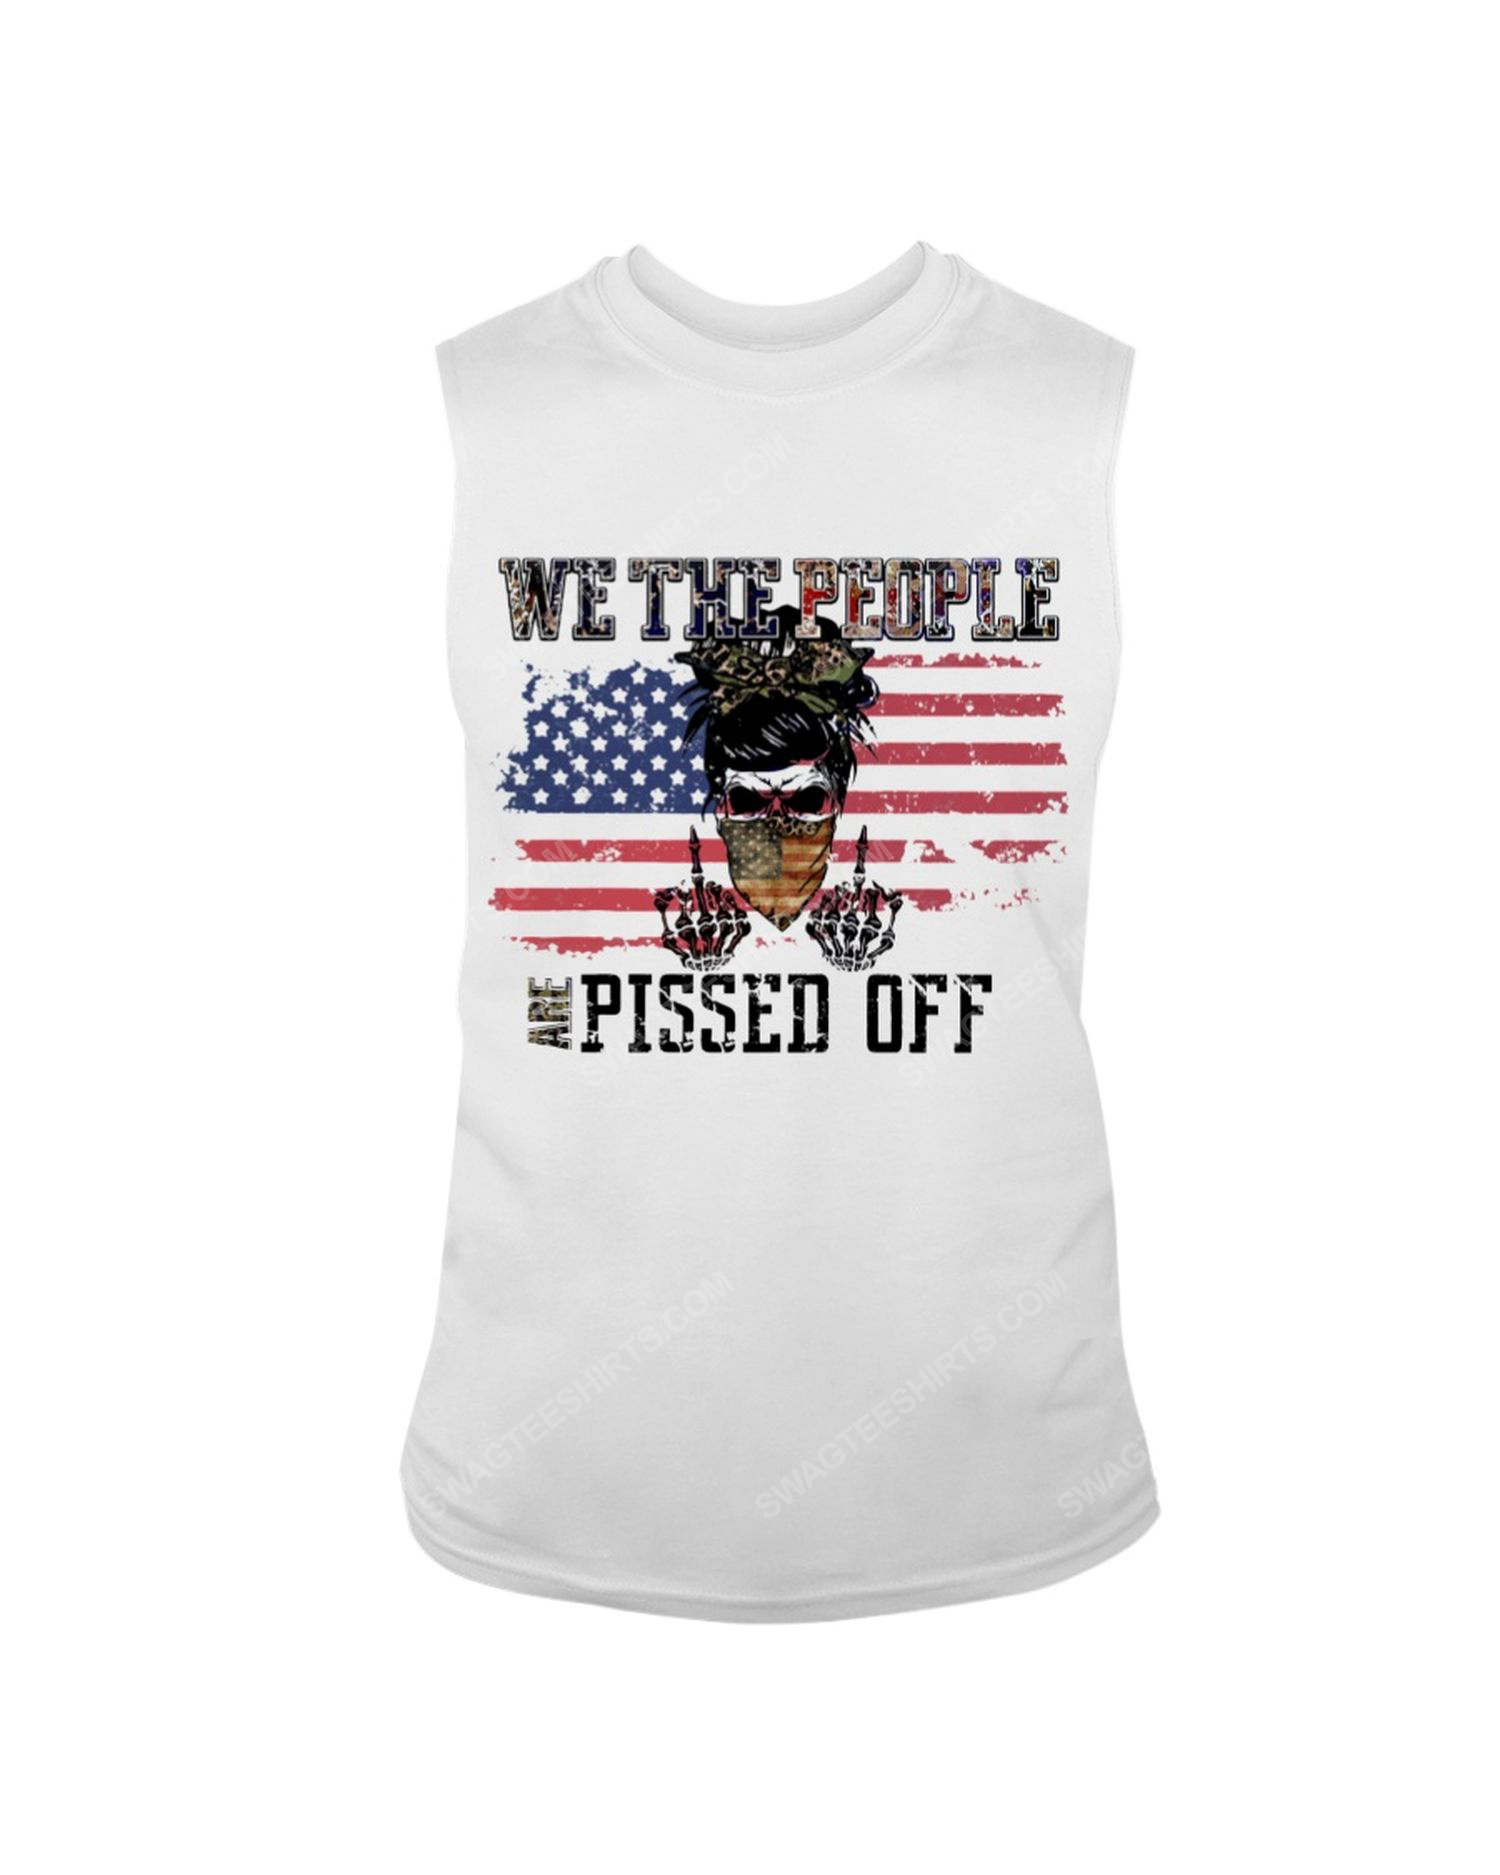 We the people are pissed off fight for democracy political tank top